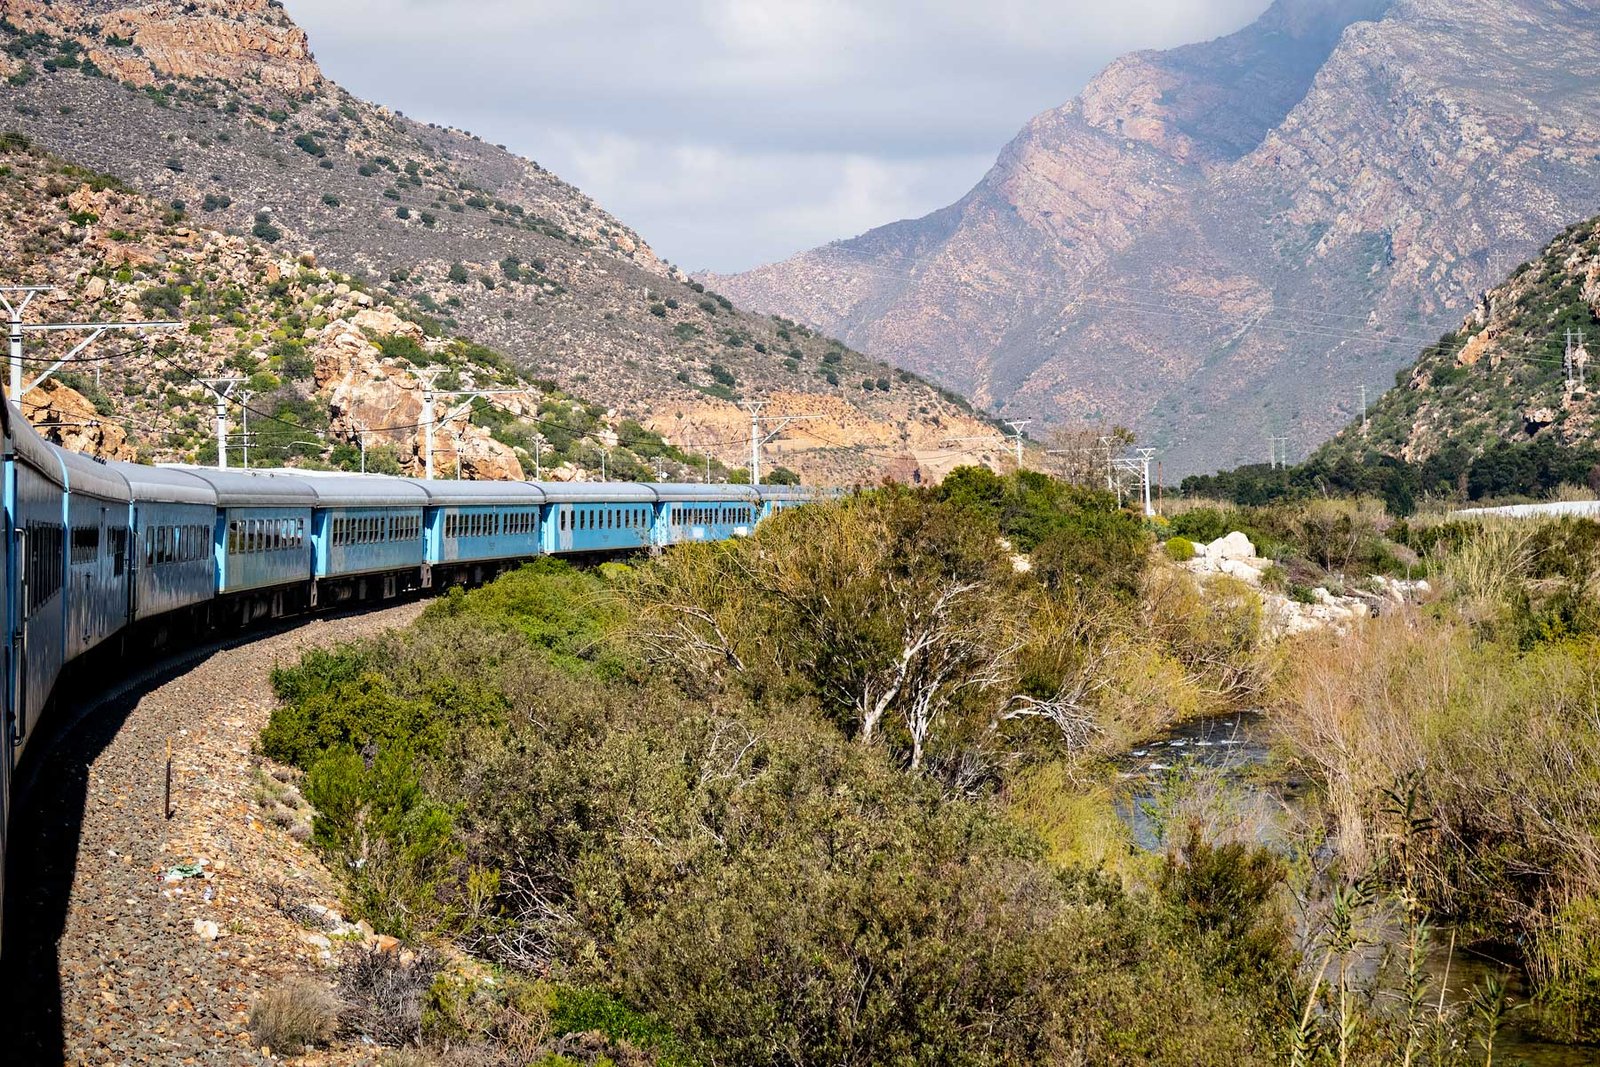 Taking the train from Johannesburg to Cape Town. South Africa in 3 Weeks | The Perfect South Africa itinerary for your first trip.